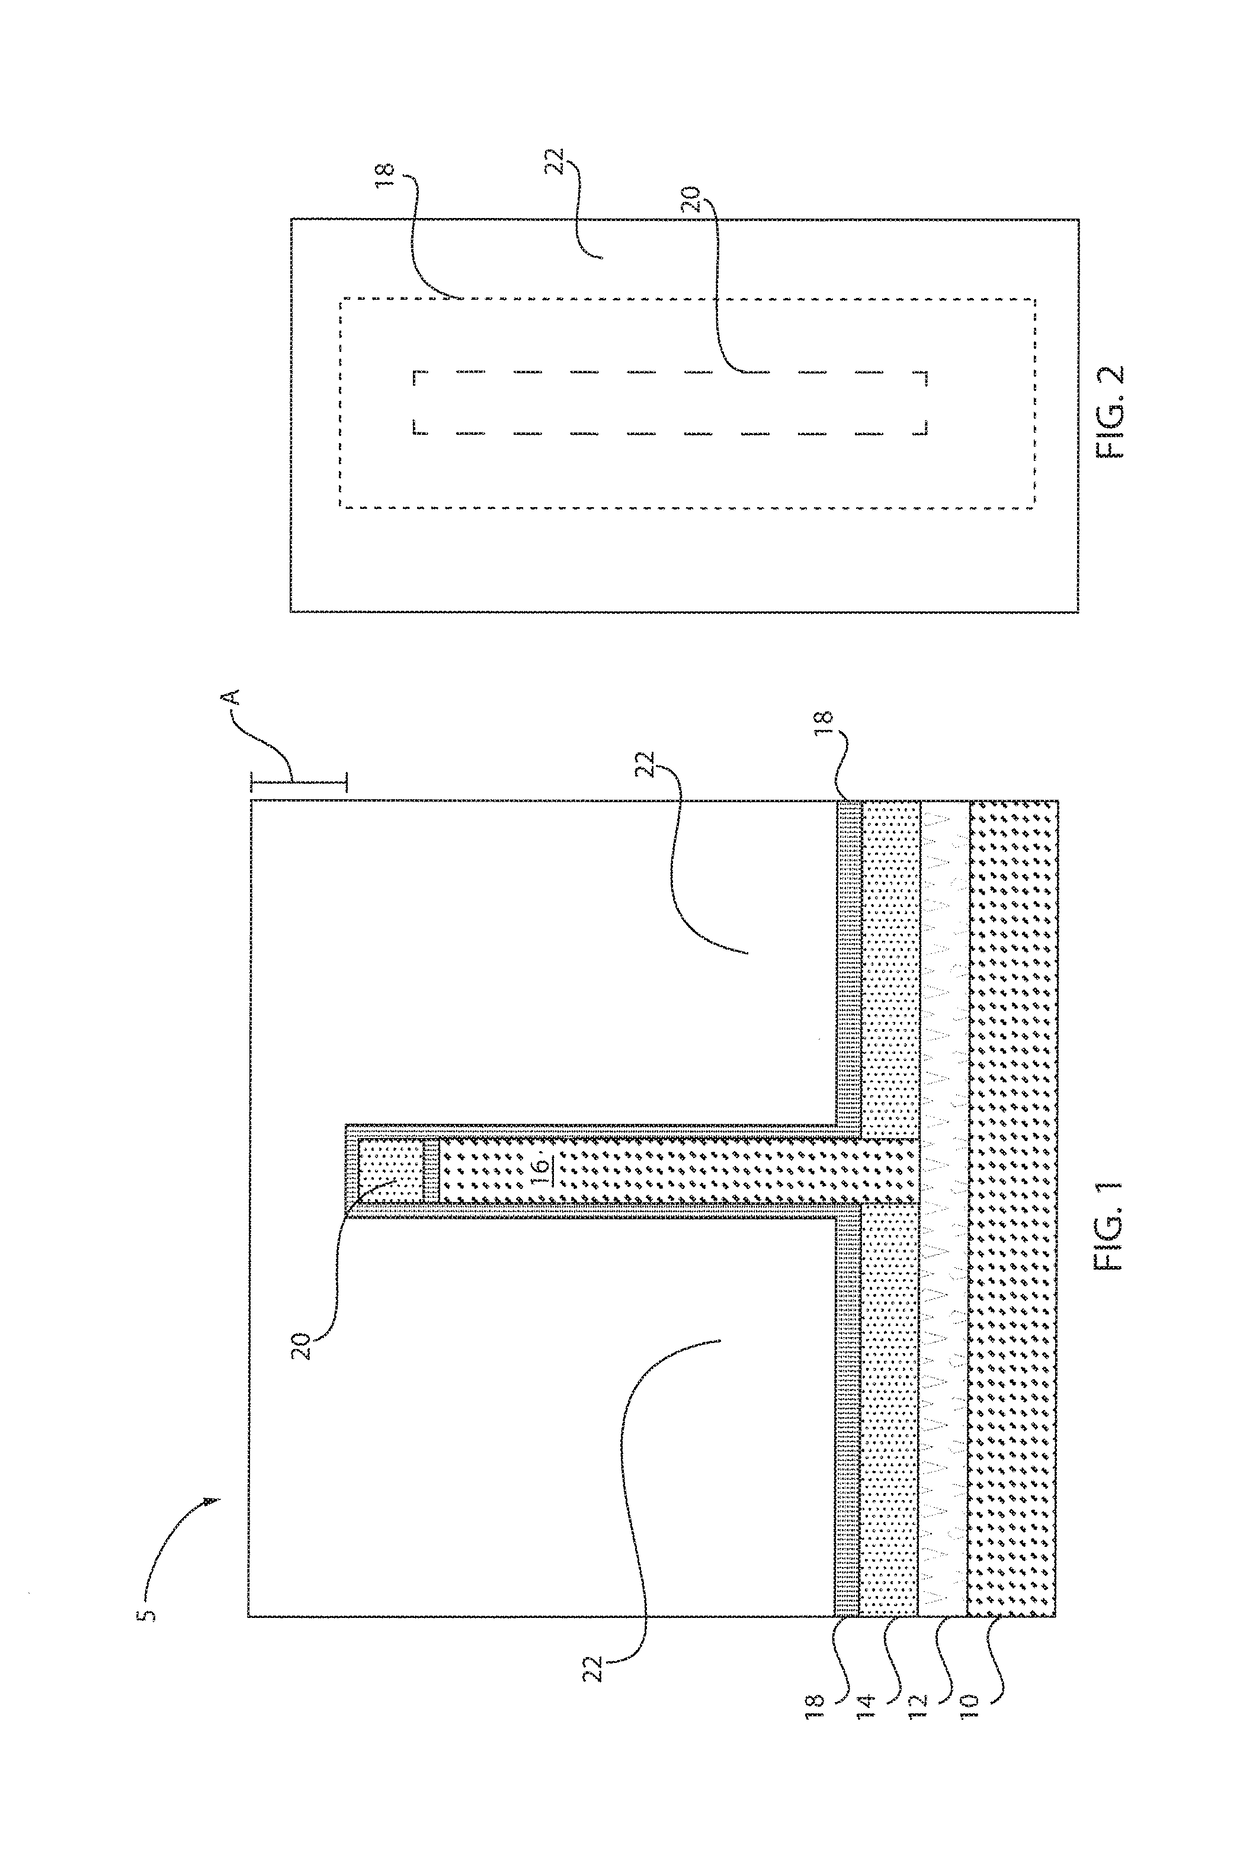 Replacement metal gate scheme with self-alignment gate for vertical field effect transistors